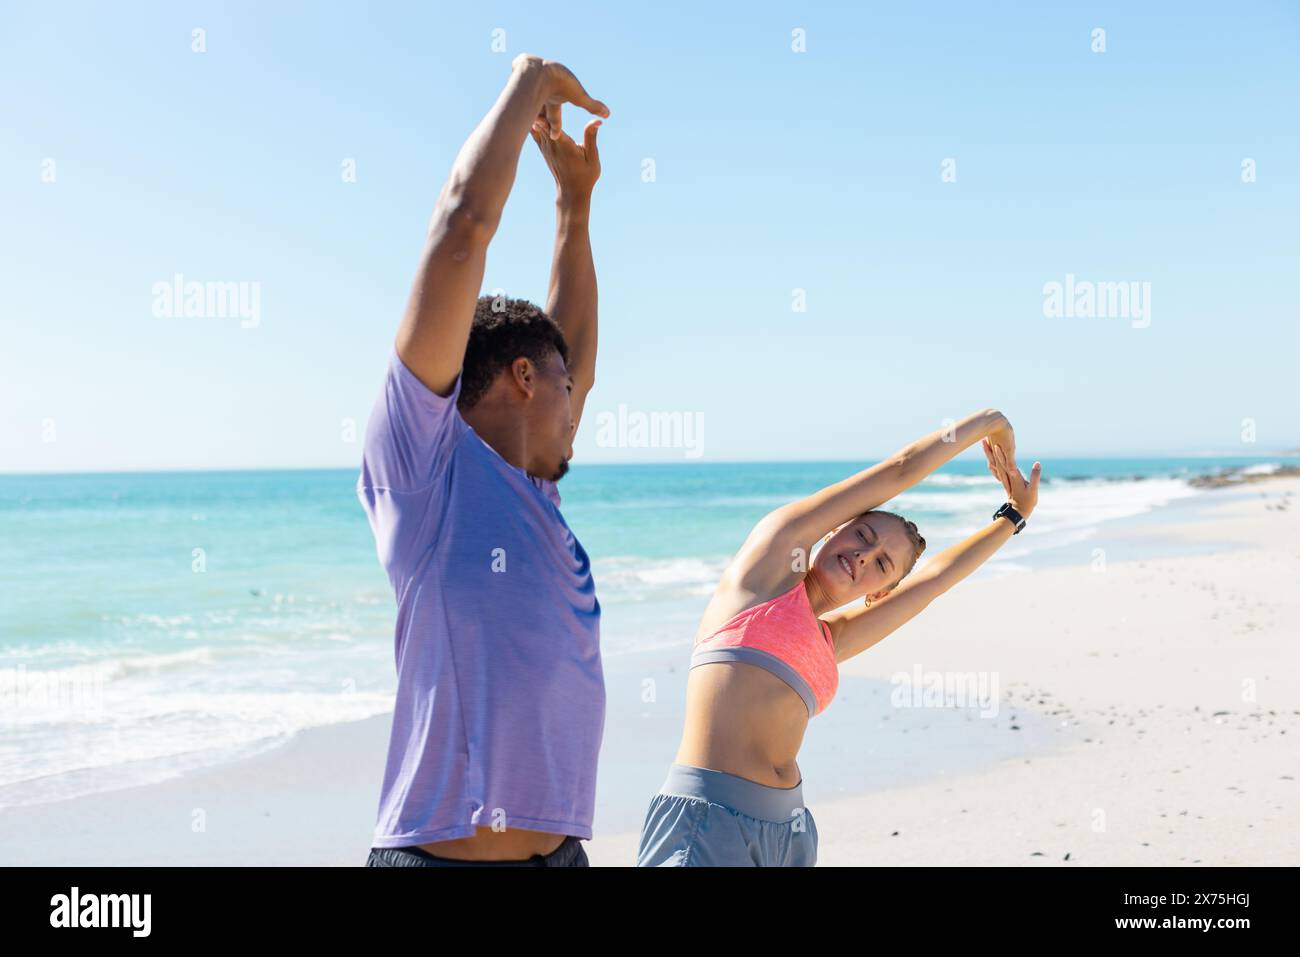 Am Strand diverse Paare Stretching, sowohl fit als auch aktiv Stockfoto